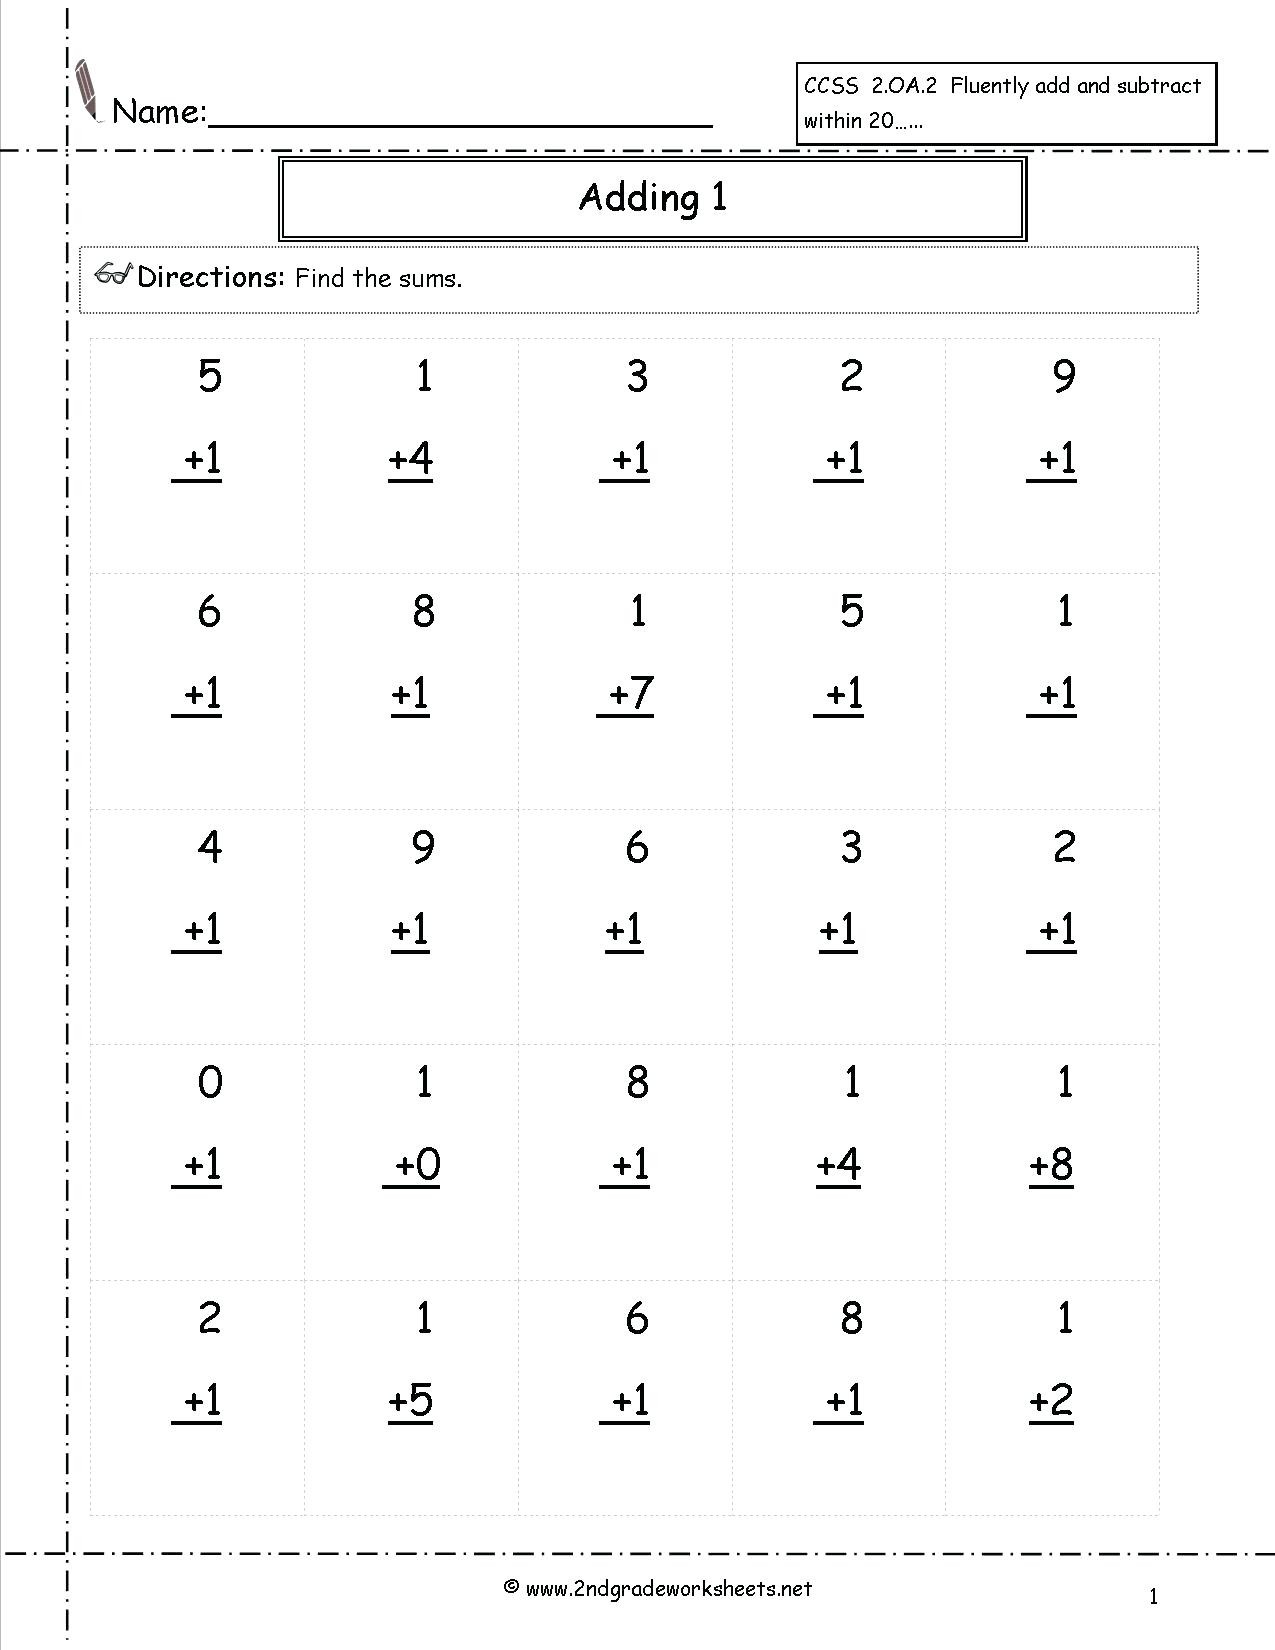 add plus math adding one addition facts worksheet add mathtype to word 2007